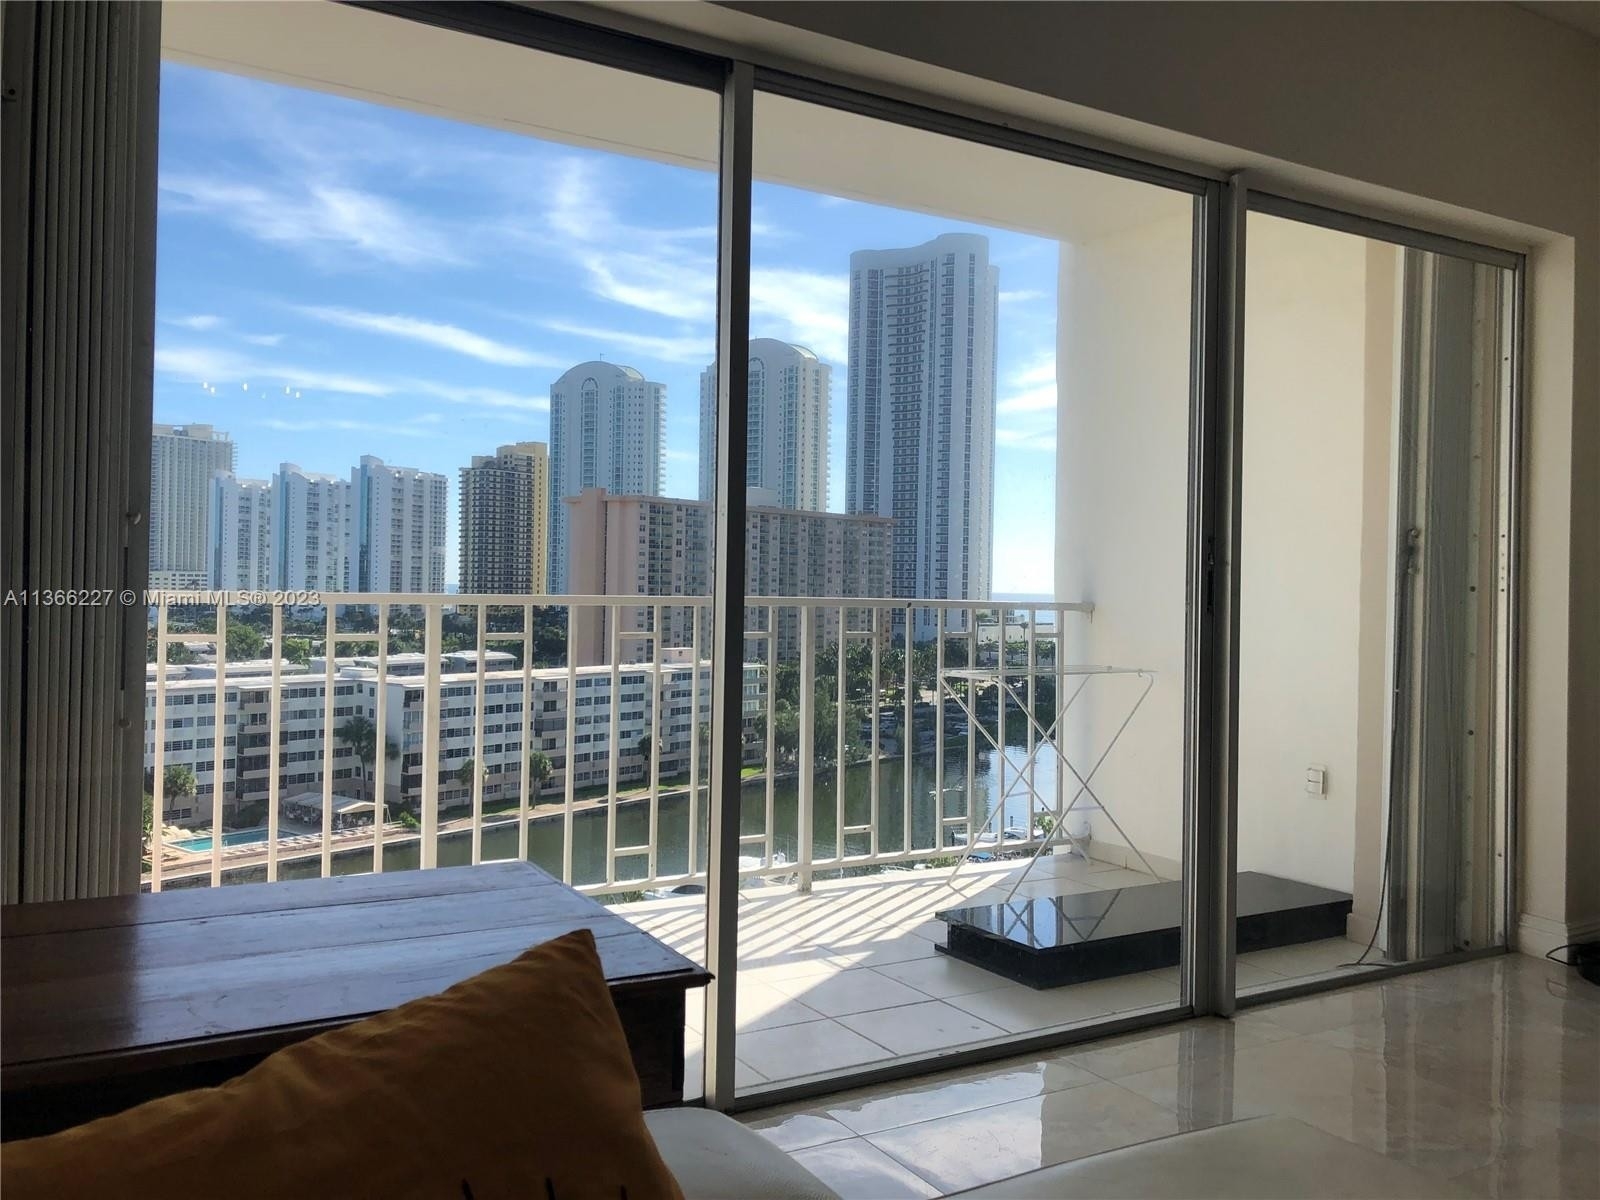 22. Condominiums for Sale at 300 Bayview Dr, 1007 Sunny Isles Beach, FL 33160